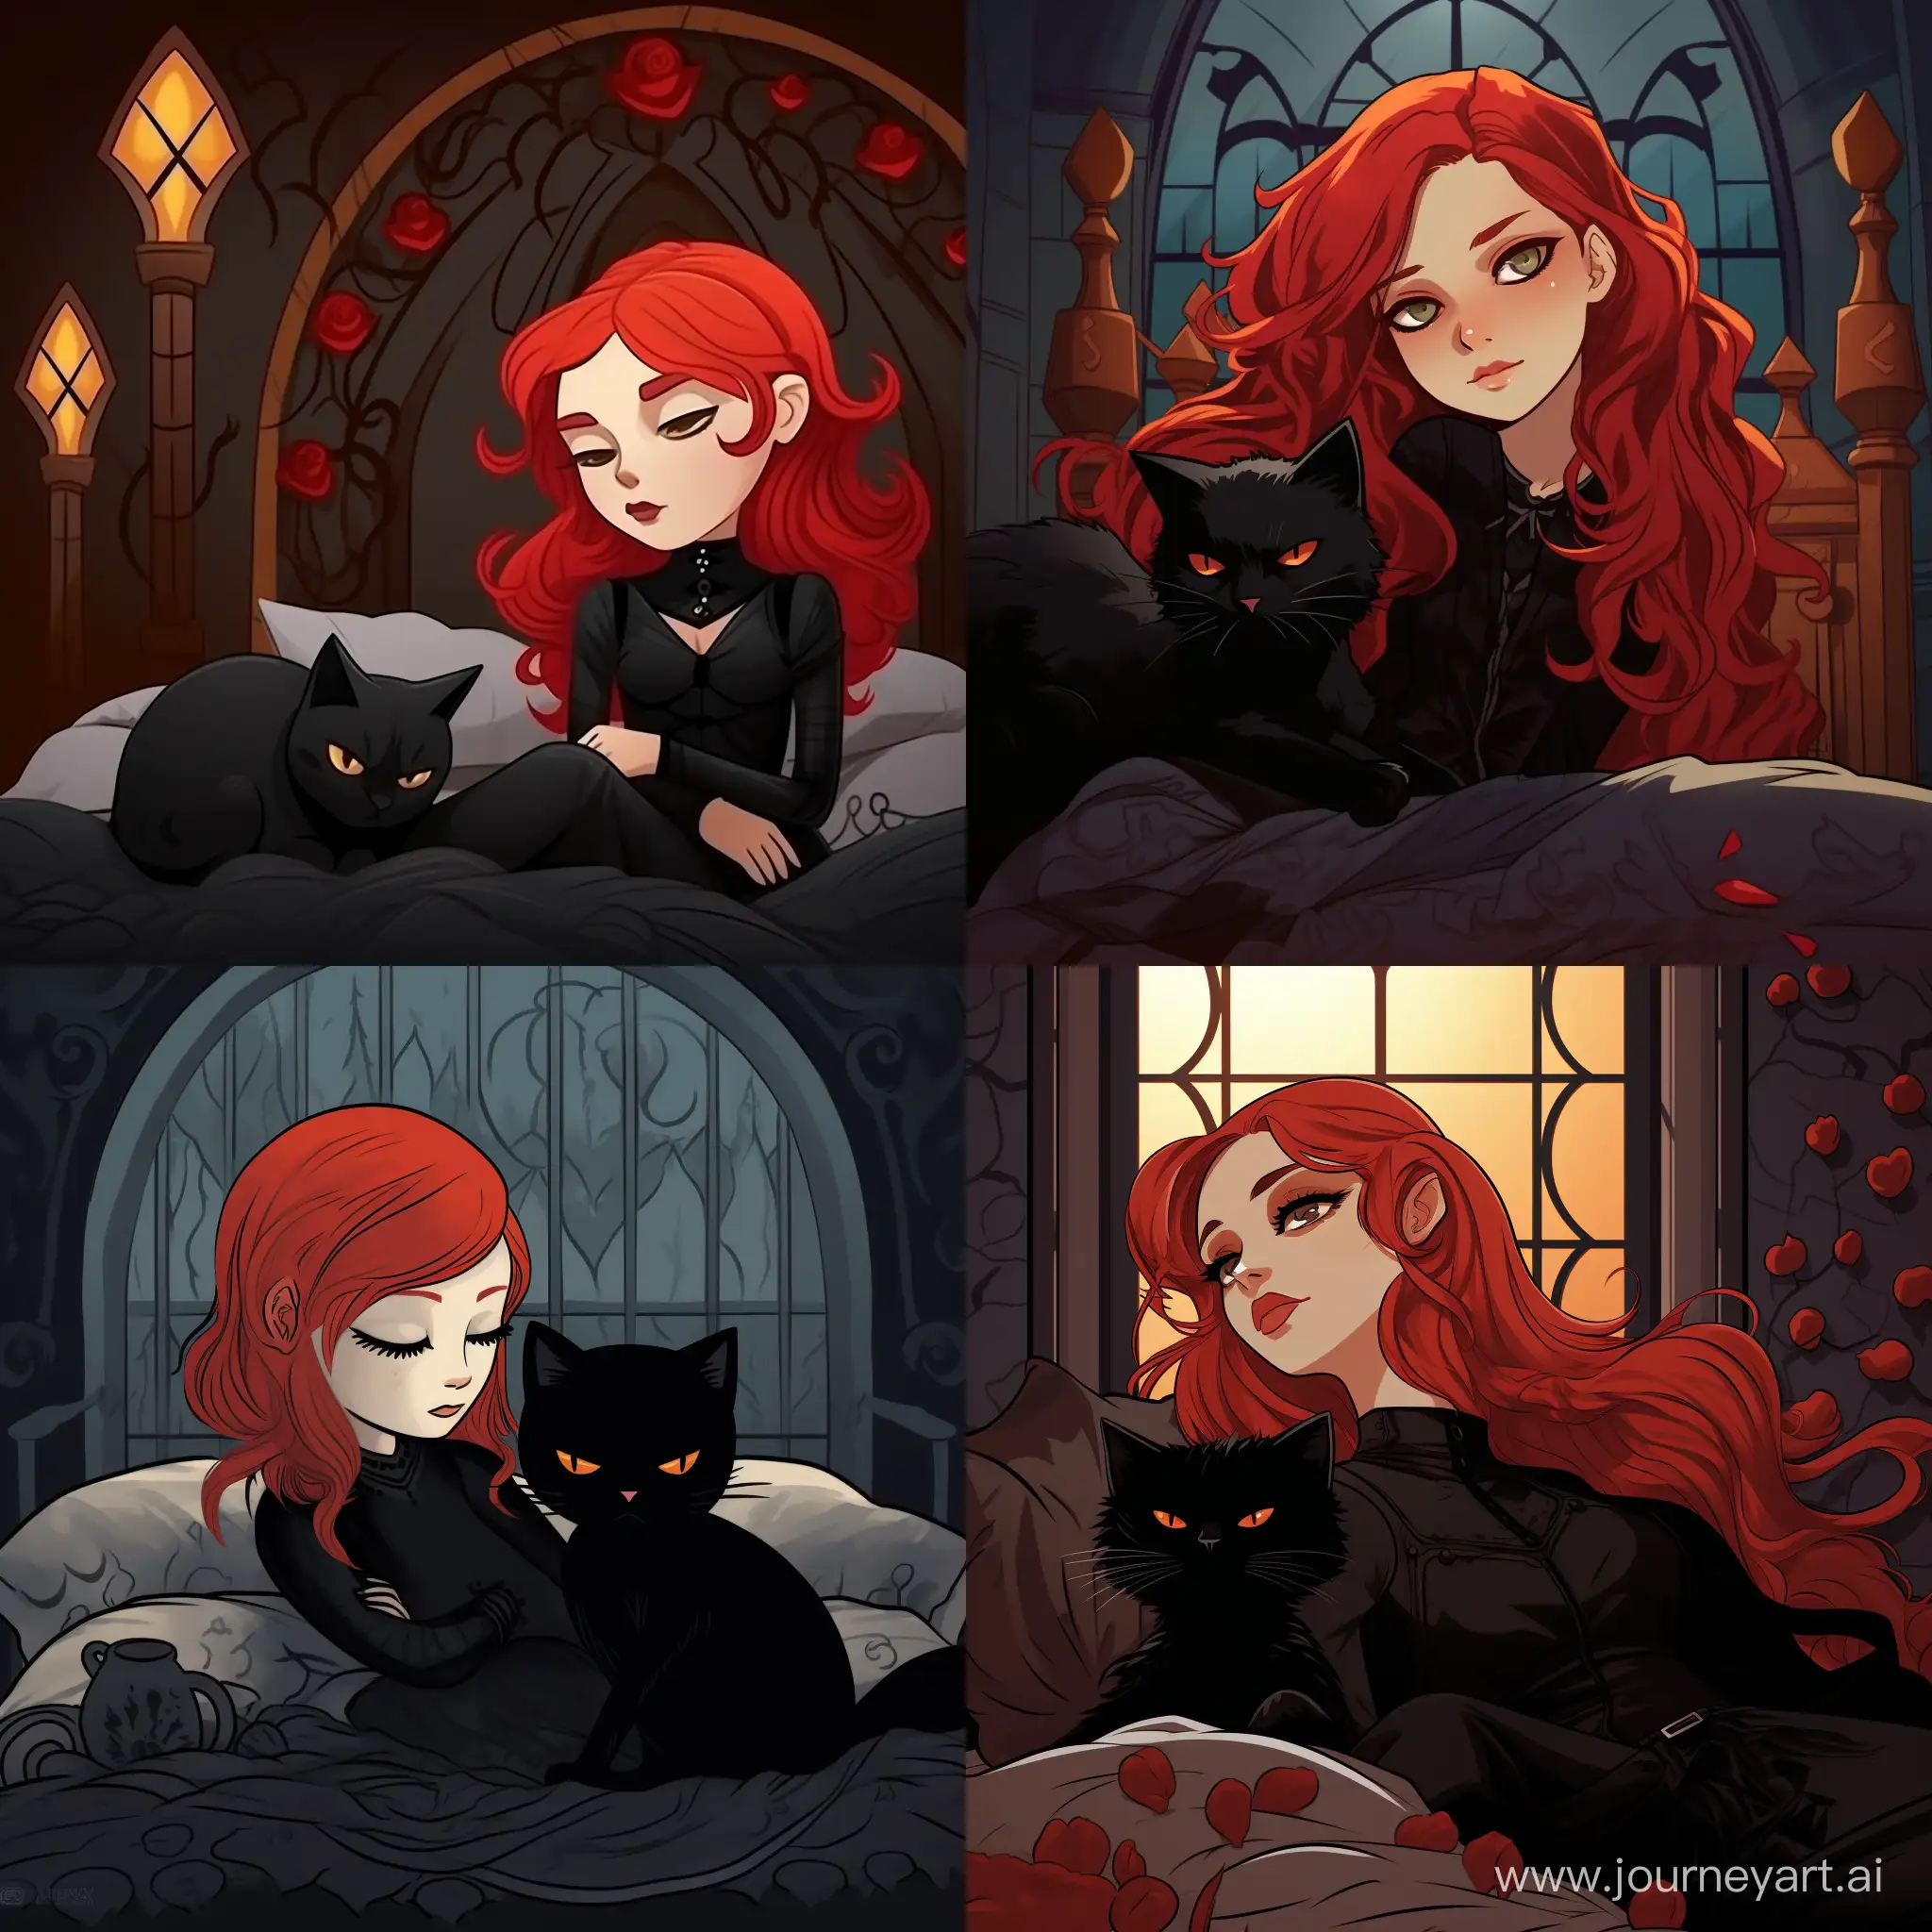 Enchanting-RedHaired-Girl-in-Gothic-Slumber-with-Feline-Companion